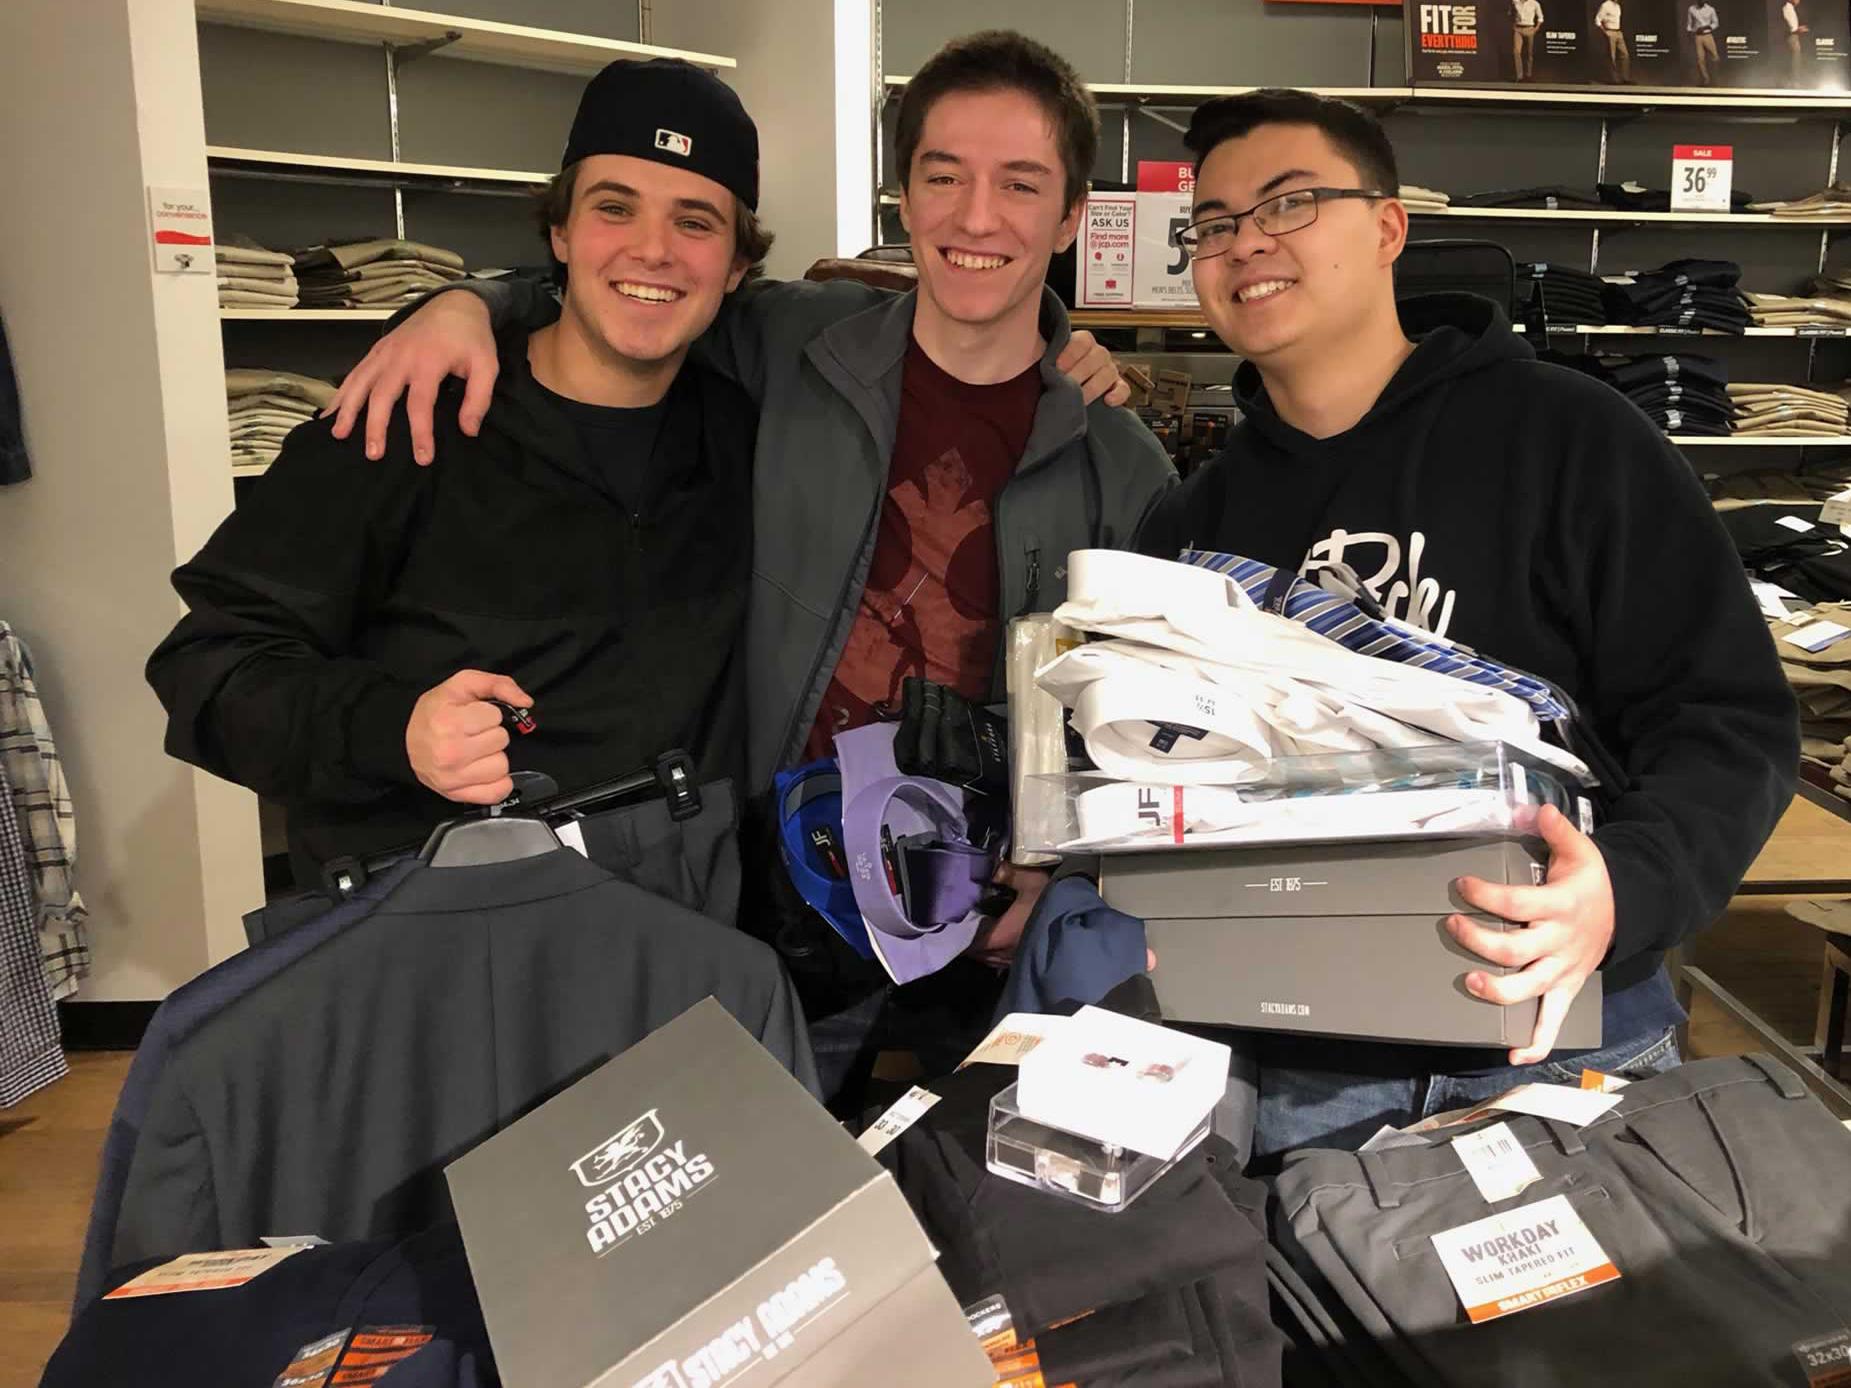 Students with discounted professional apparel as part of JCPenney partnership